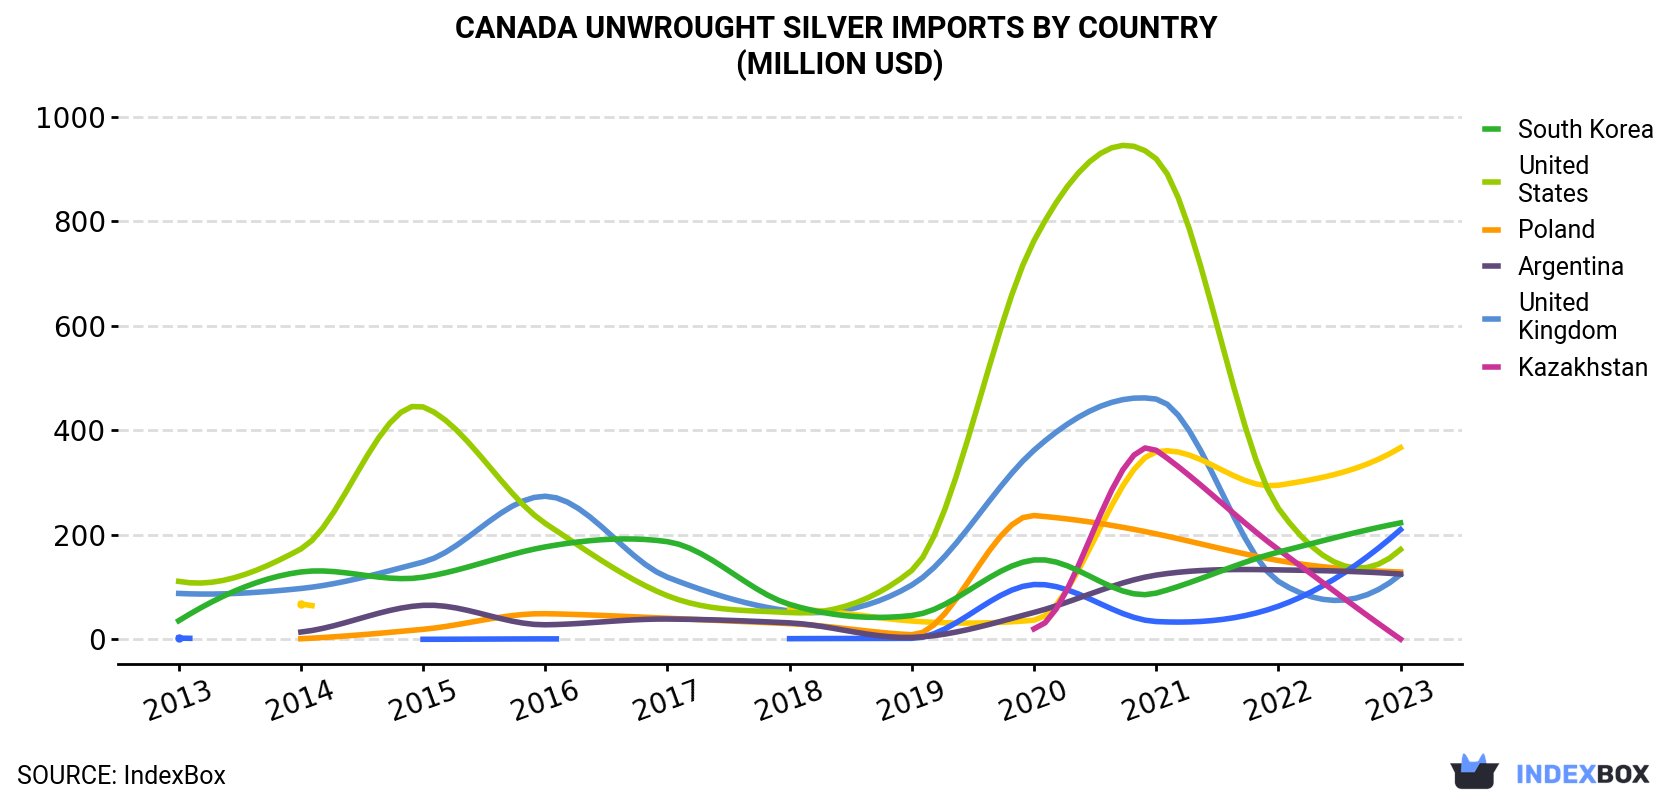 Canada Unwrought Silver Imports By Country (Million USD)